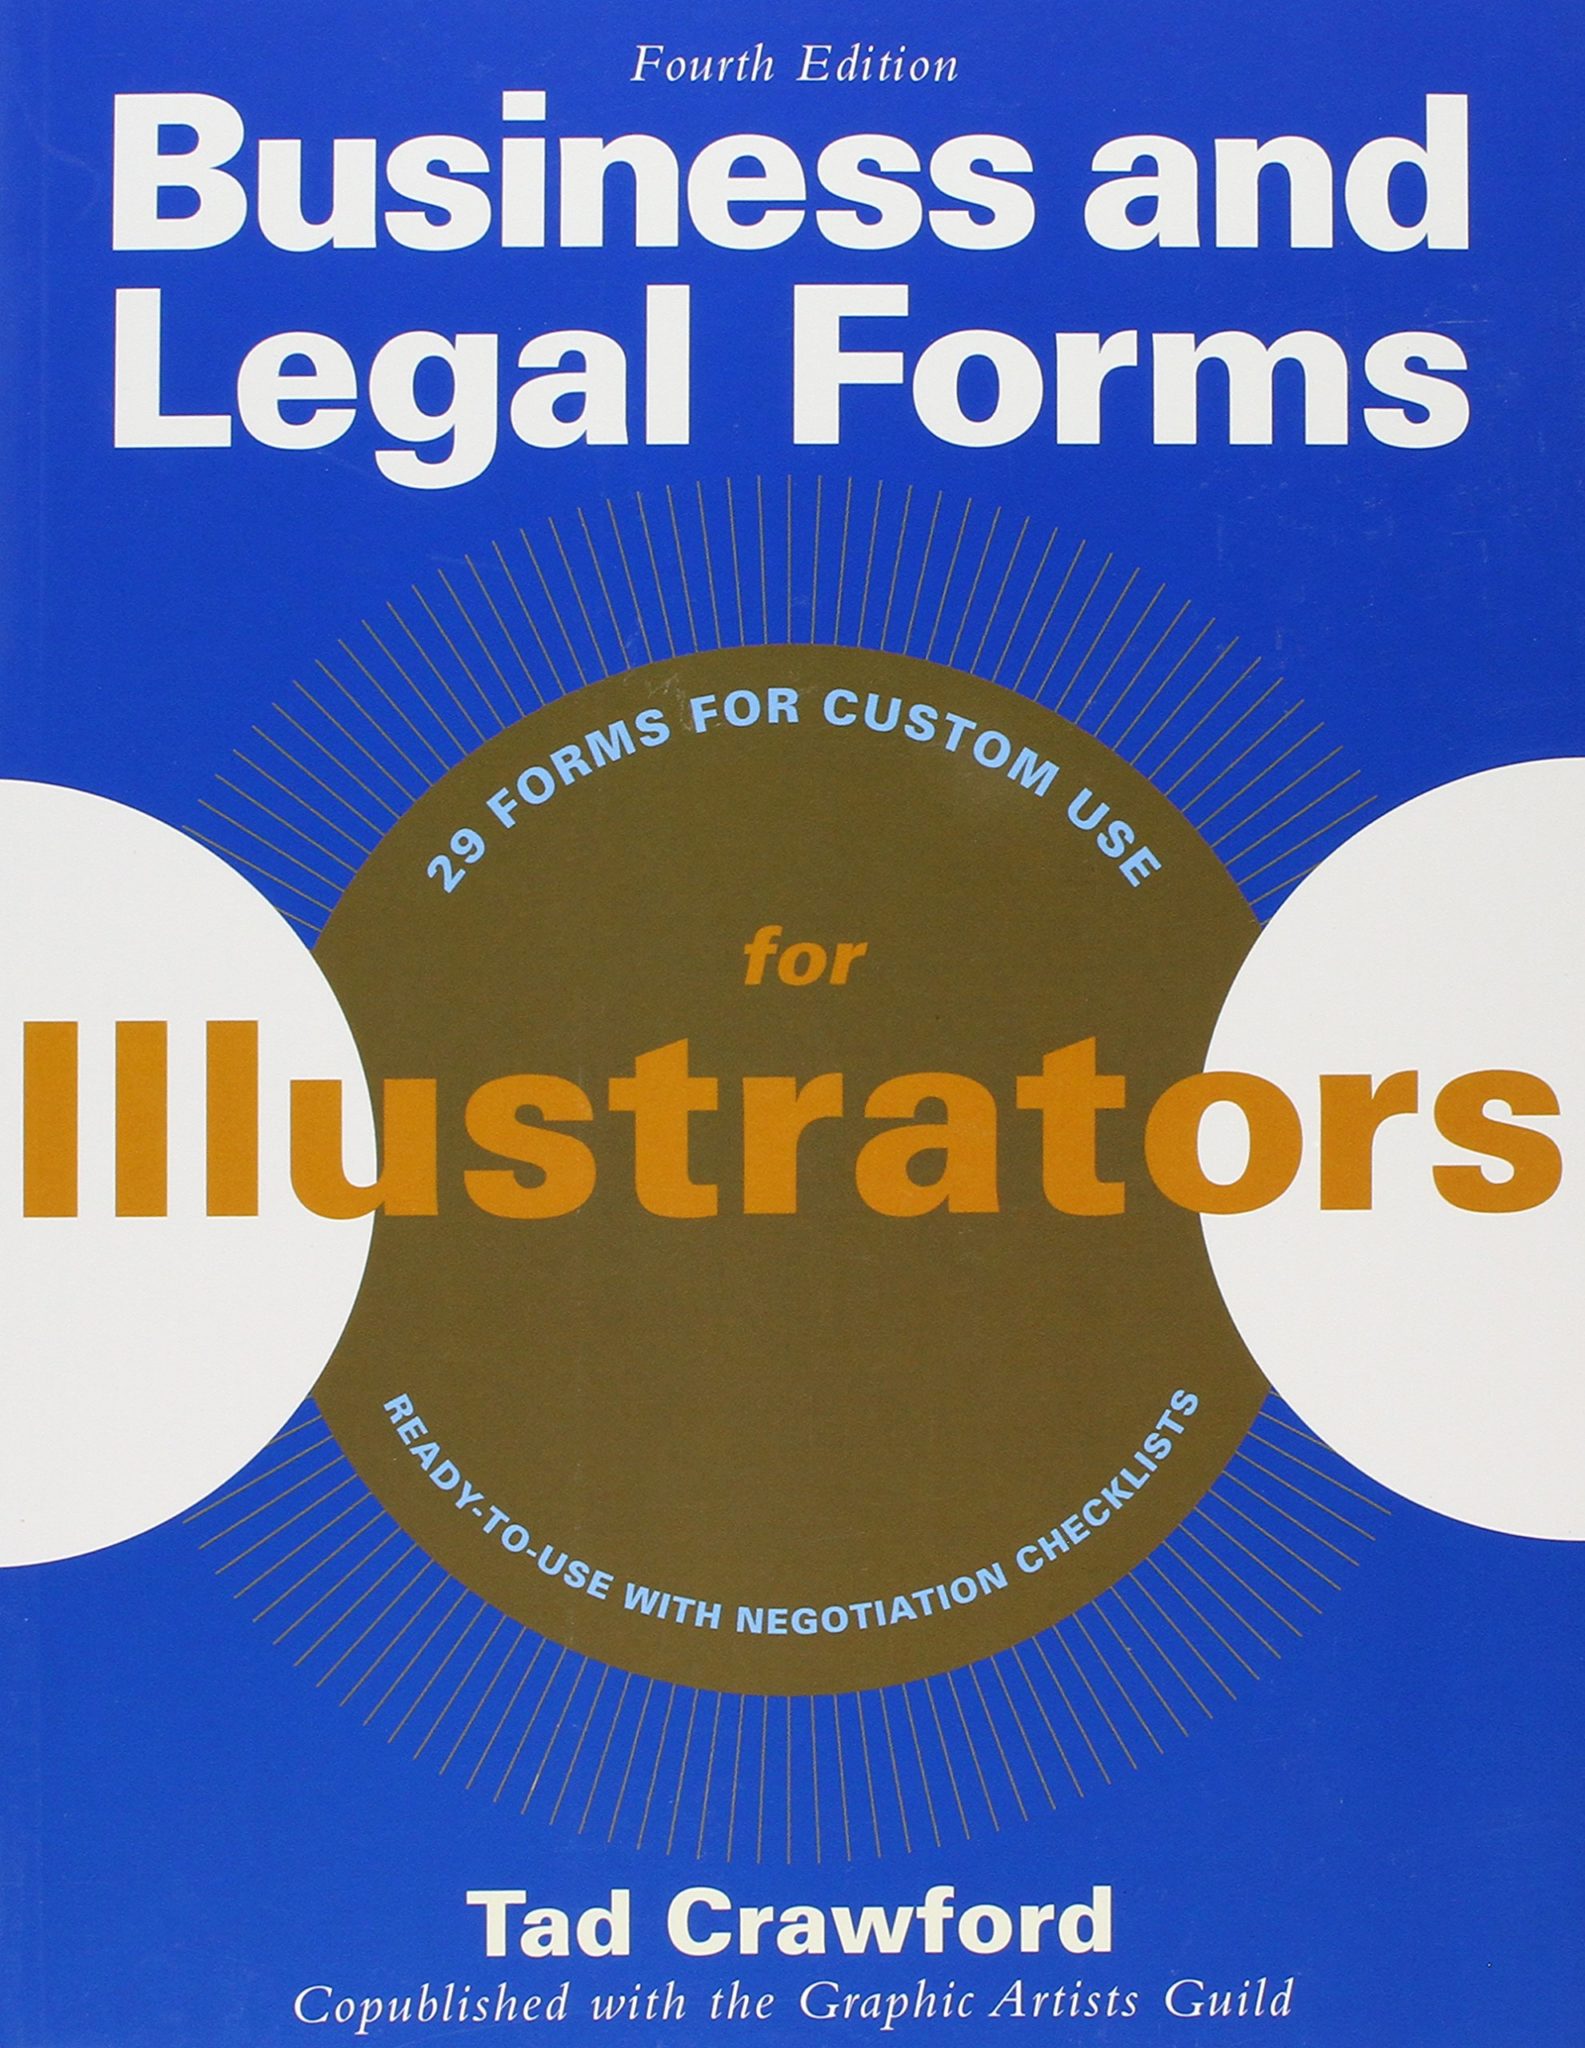 Business and Legal Forms for Illustrators (Fourth Edition)